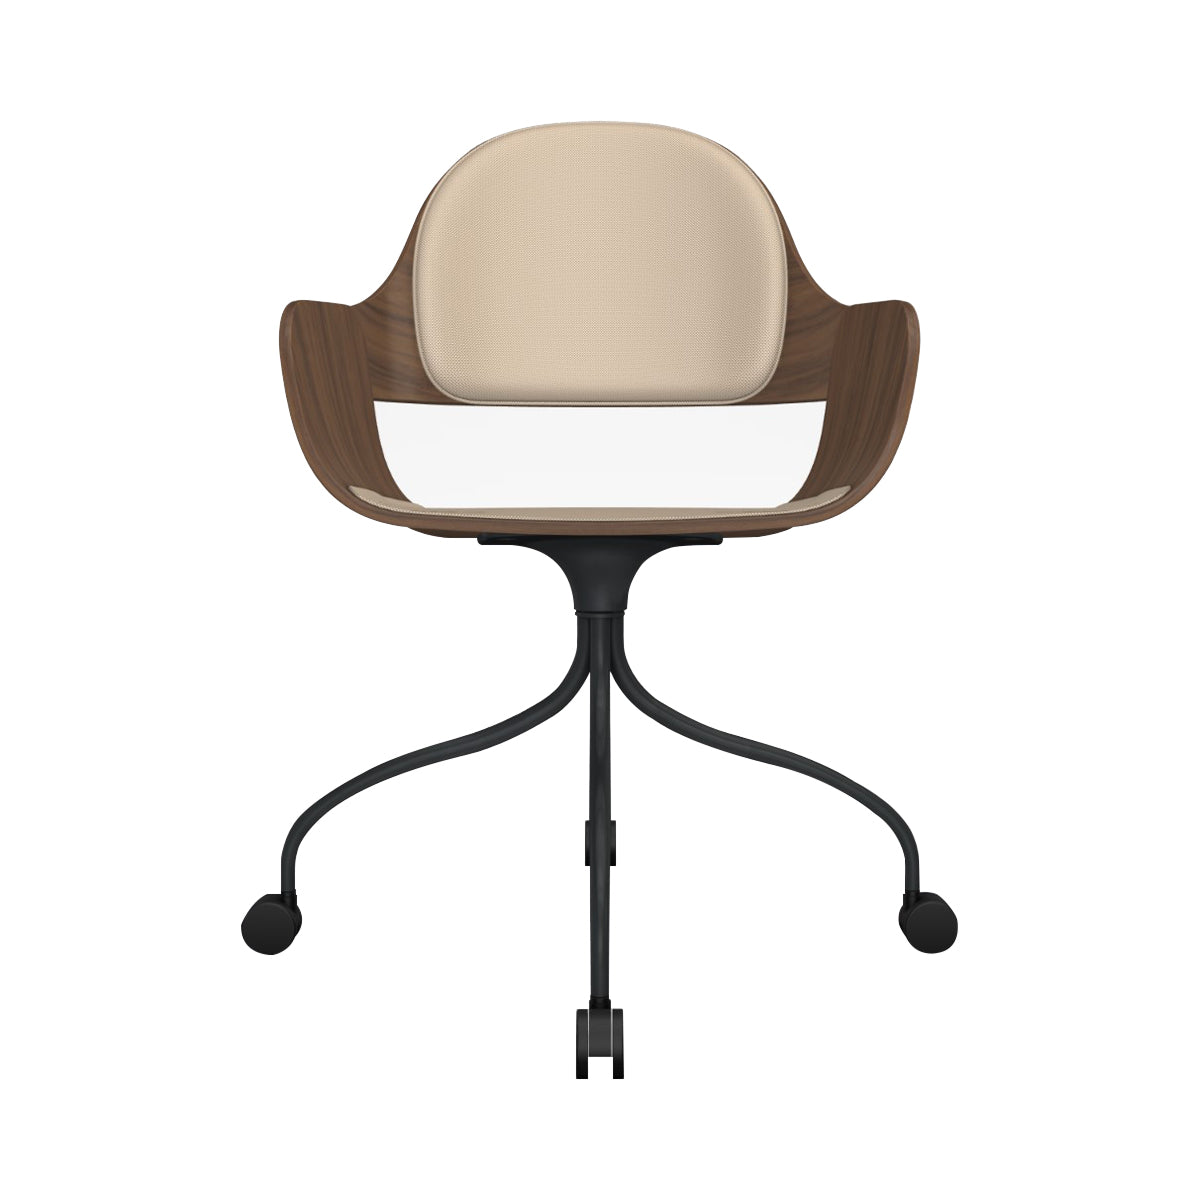 Showtime Nude Chair with Wheel: Seat + Backrest Cushion + Walnut + Anthracite Grey